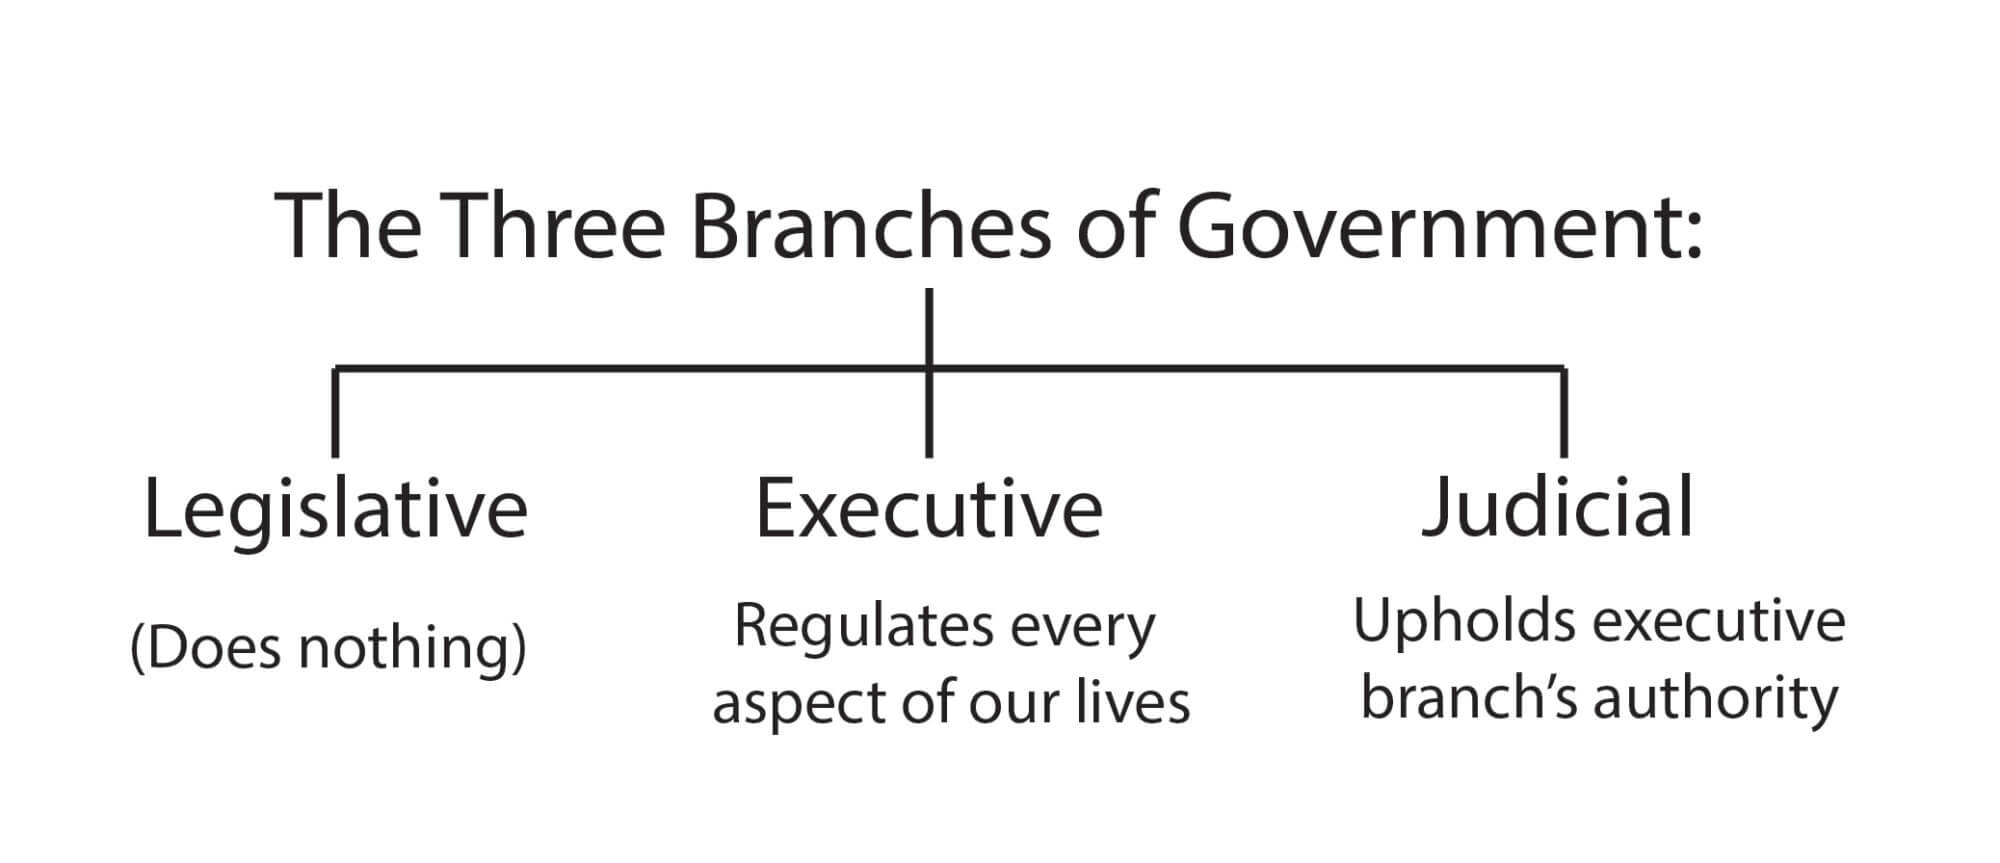 Branches Of Govt 01 2000x863 